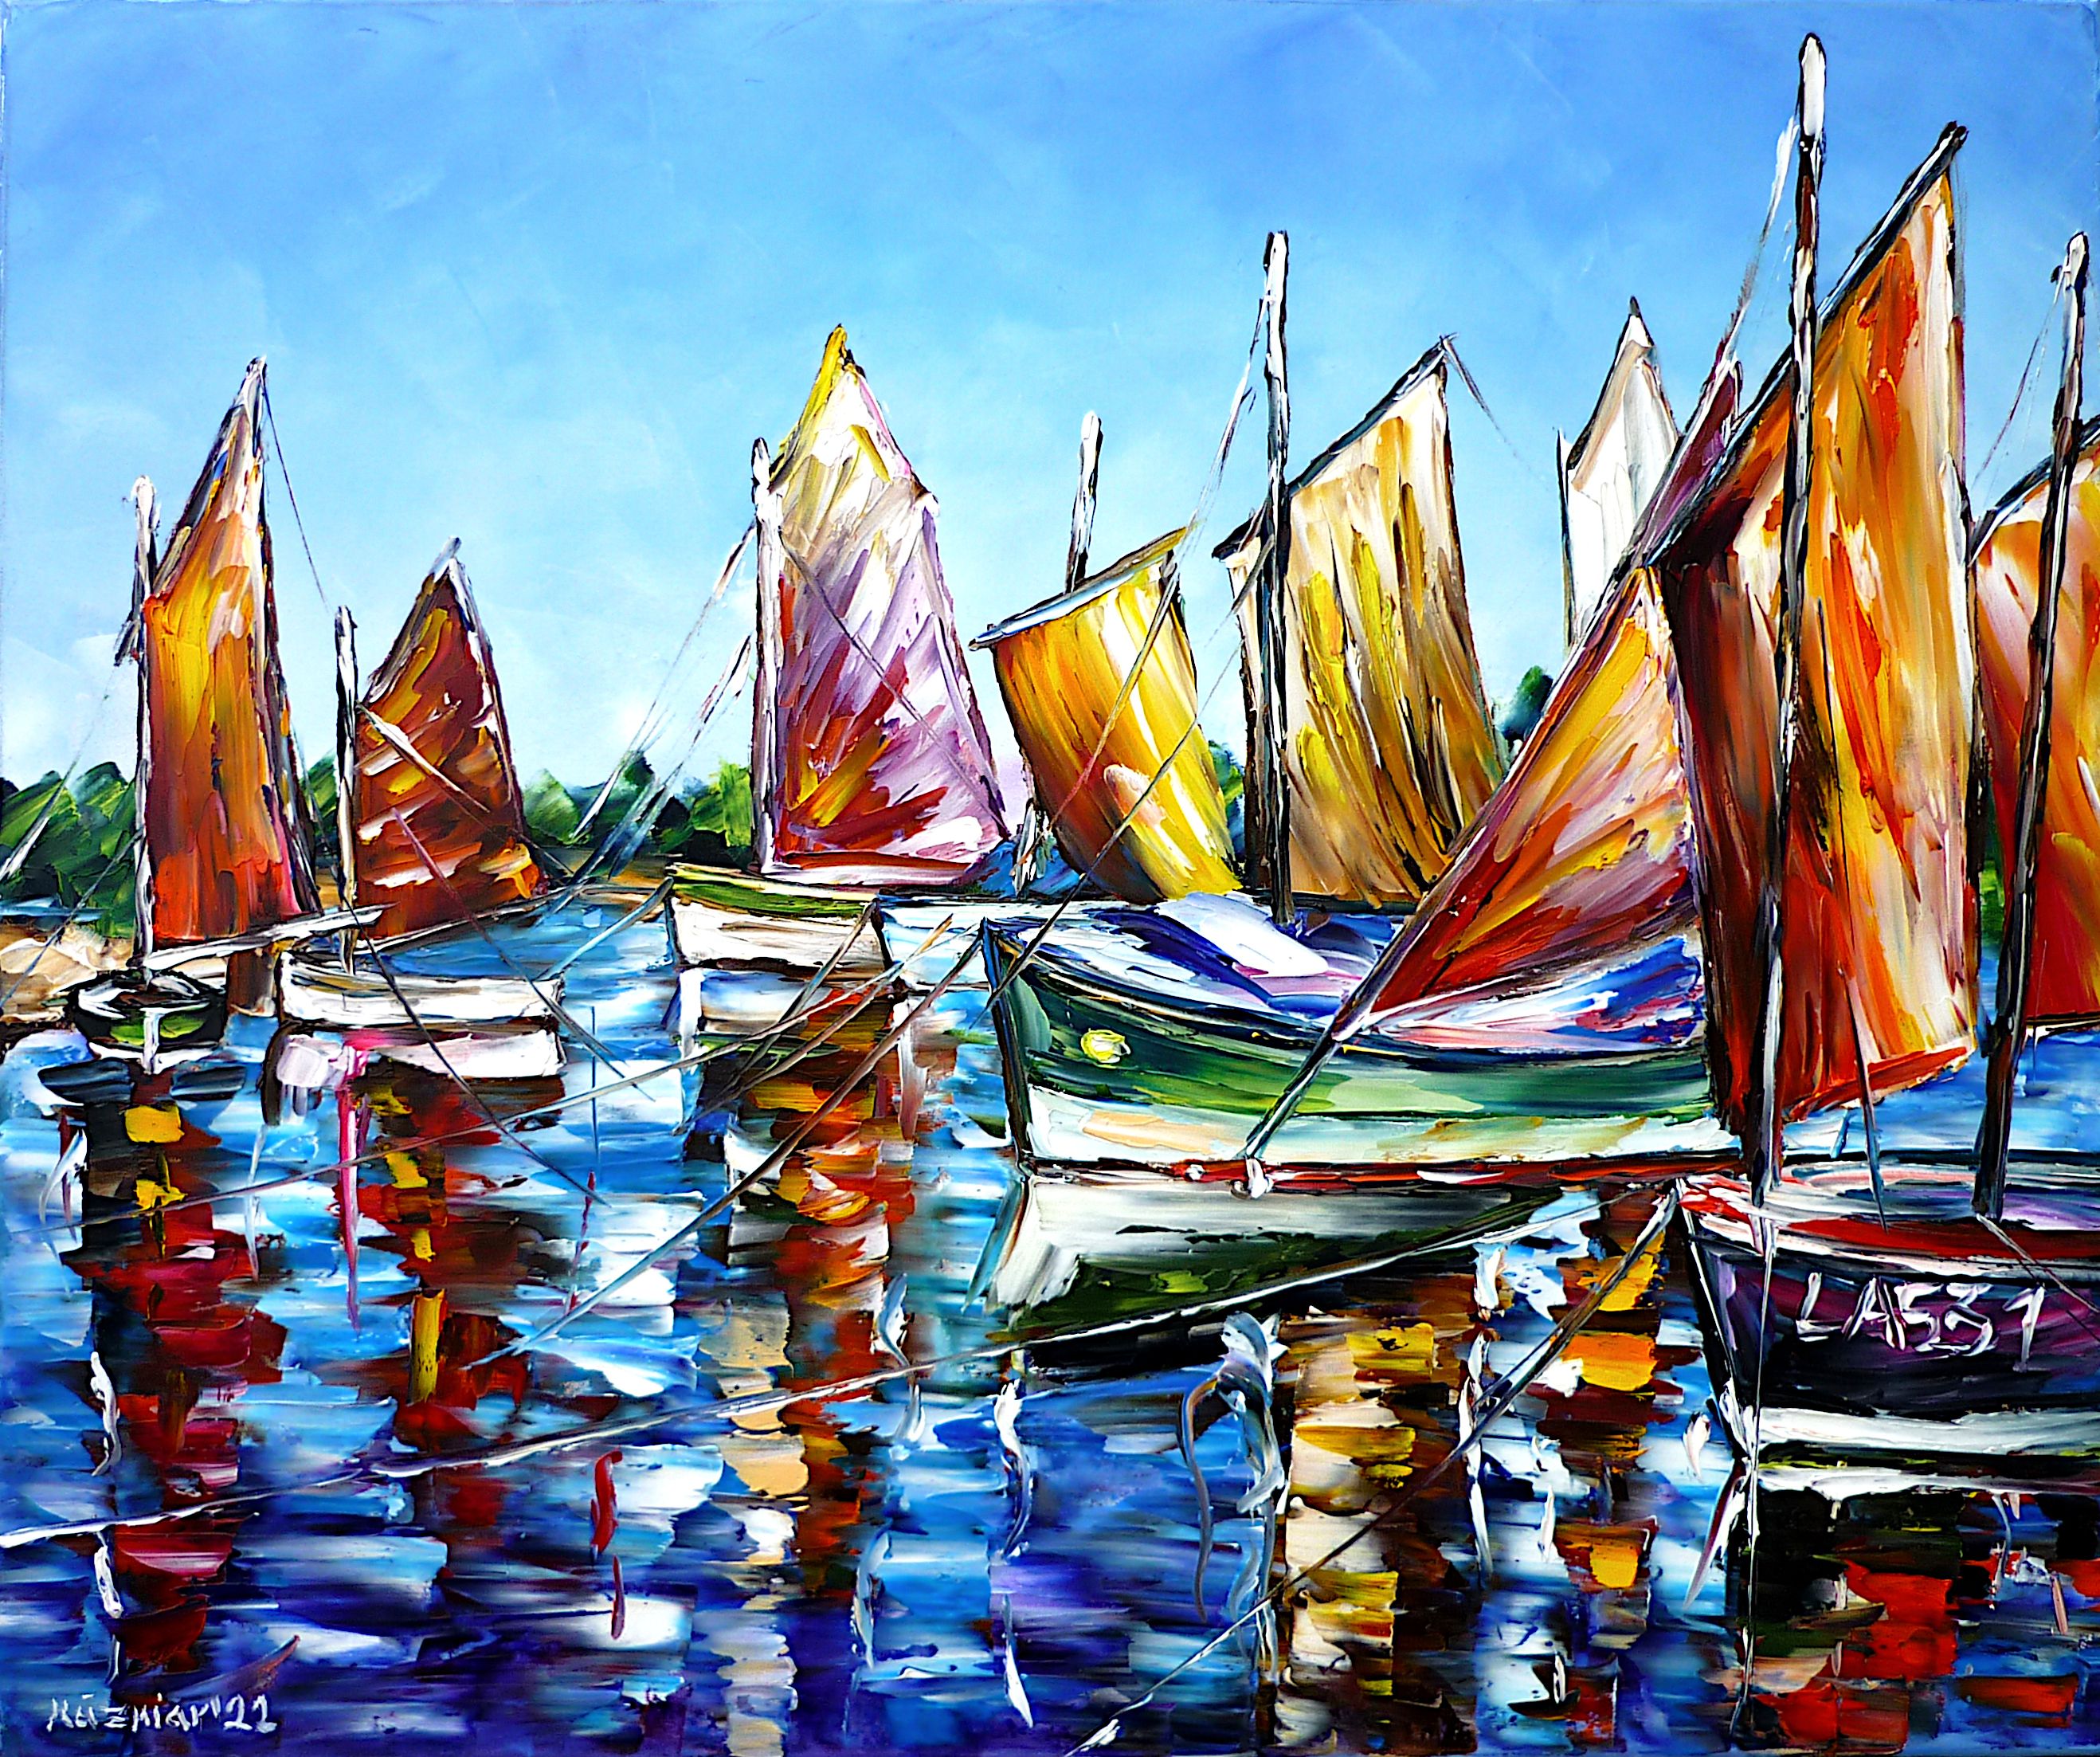 loguivy de la mer,Paimpol,Côtes-d'Armor,Ploubazlanec,old harbor,bretagne painting,boats abstract,harbor painting,boats on the shore,anchorage,northern France,boats in port,port in Brittany,harbor scene,boats in the harbor,harbor in Brittany,port village of Brittany,sailing boats,fishing boats,port scene,beautiful Brittany,Brittany love,boats paintings,boats love,beautiful France,village in Brittany,fishing village,boats on the beach,brittany landscape,i love brittany,brittany sky,blue sky,blue colors,blue painting,shades of blue,blue tones,palette knife oil painting,modern art,impressionism,abstract painting,lively colours,colorful painting,bright colors,light reflections,impasto painting,figurative